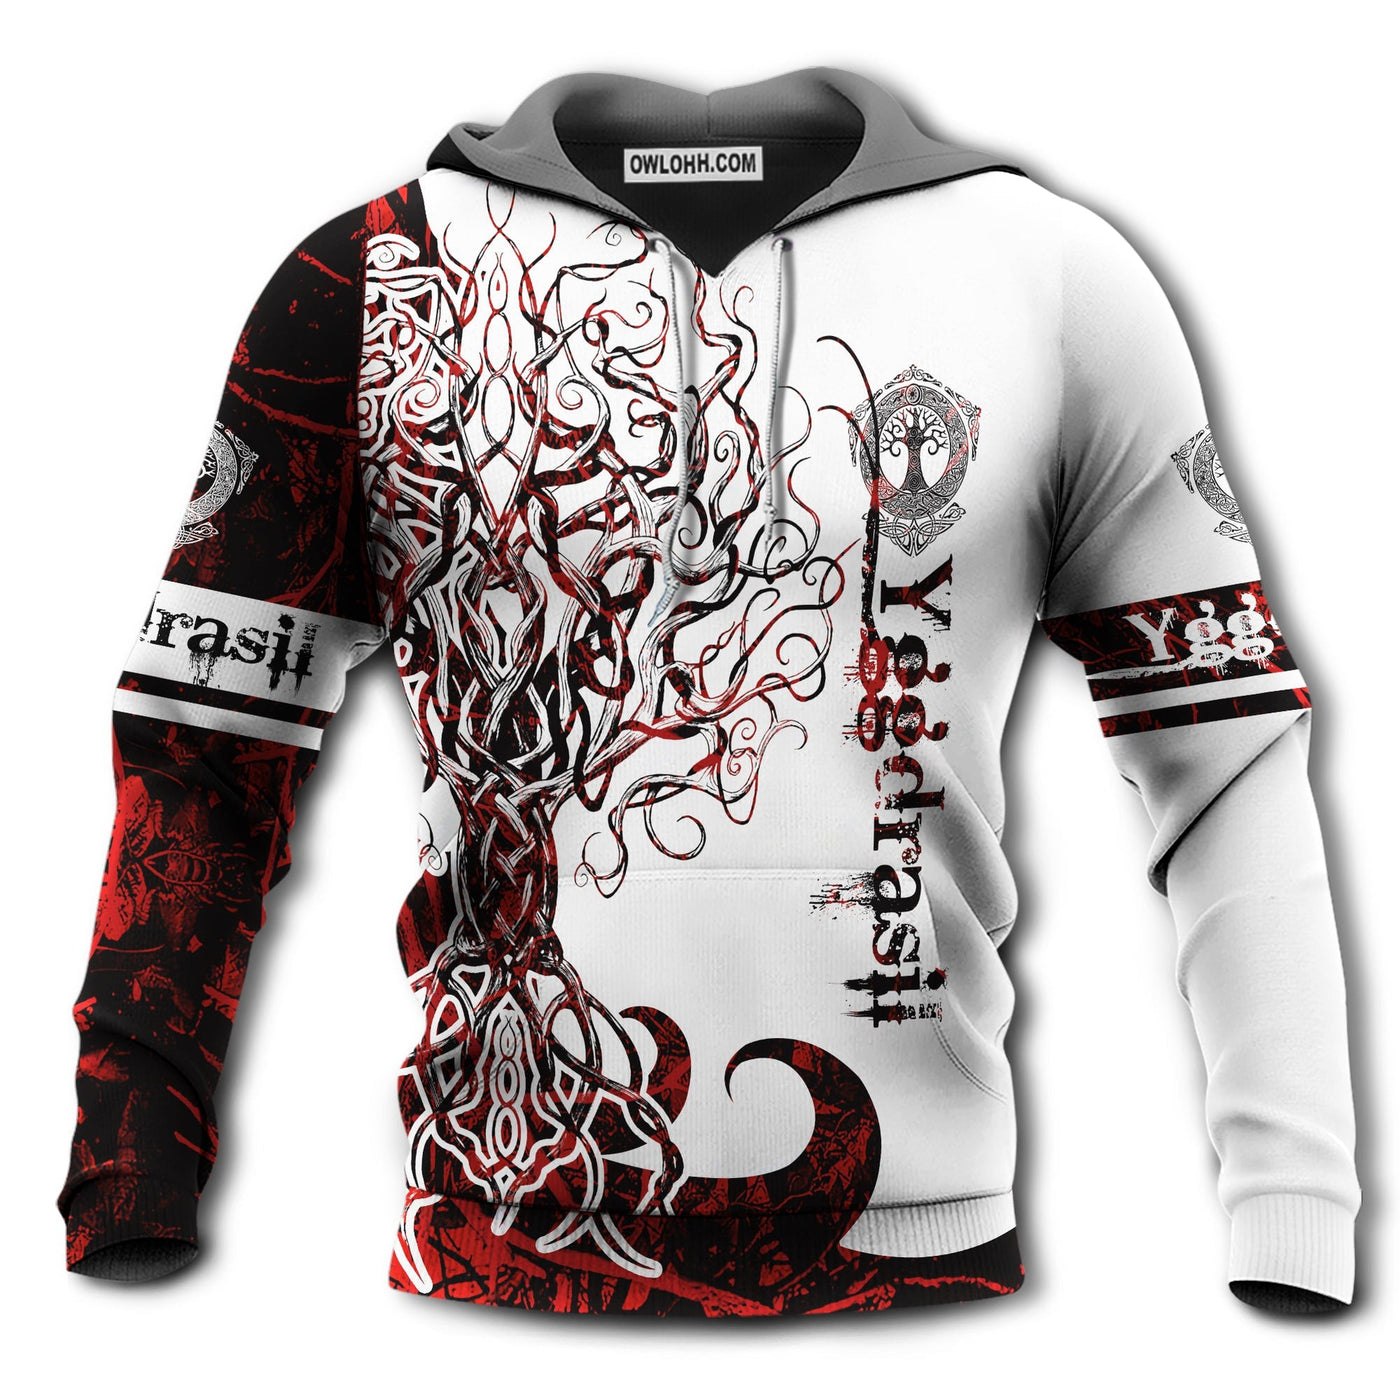 Unisex Hoodie / S Viking Yggdrasil Legend Red And White Style With So Much Fun - Hoodie - Owls Matrix LTD